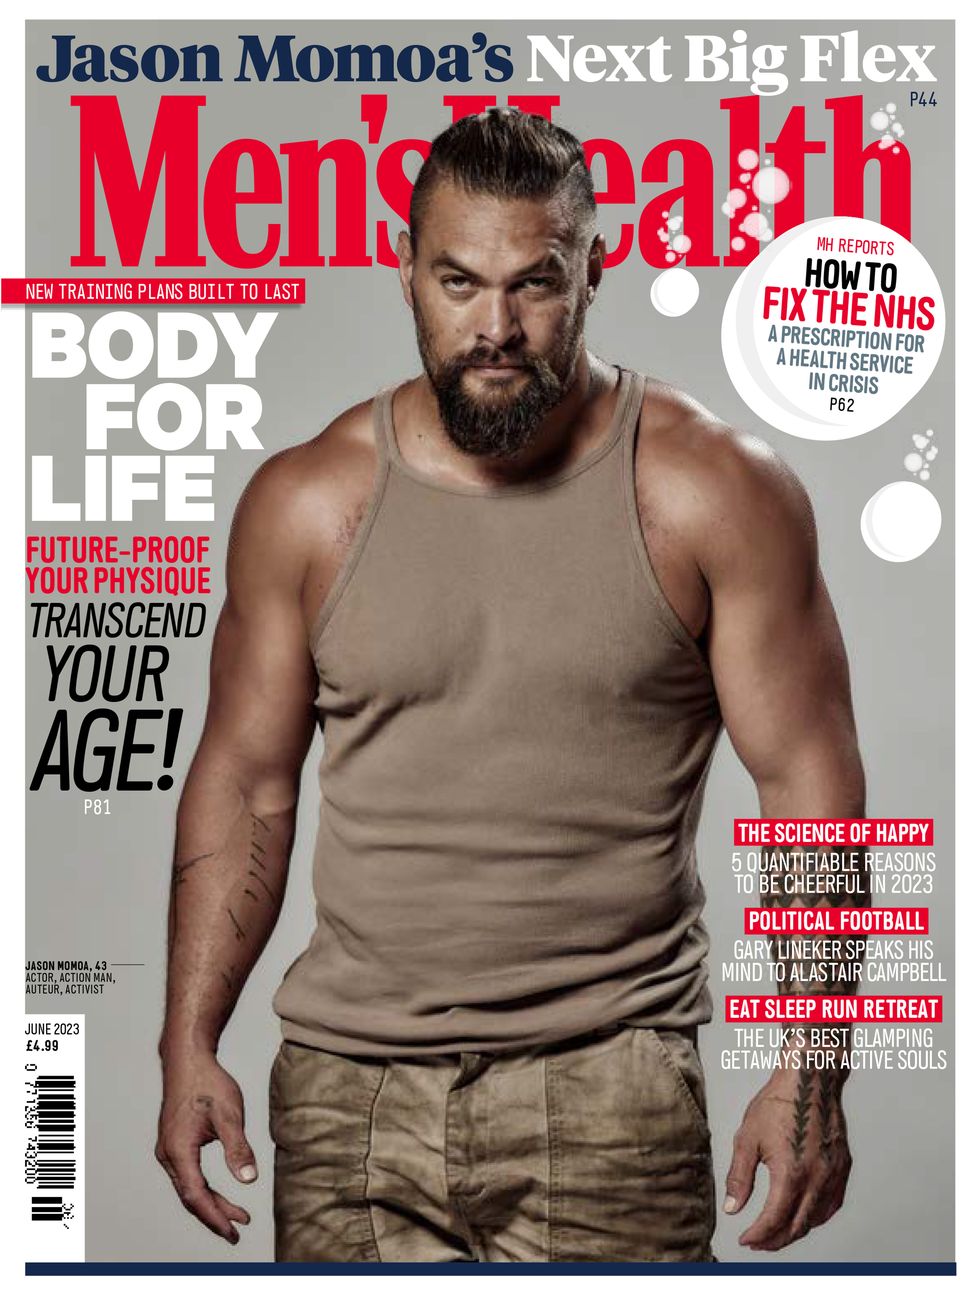 Jason Momoa talks health, fitness and building muscle